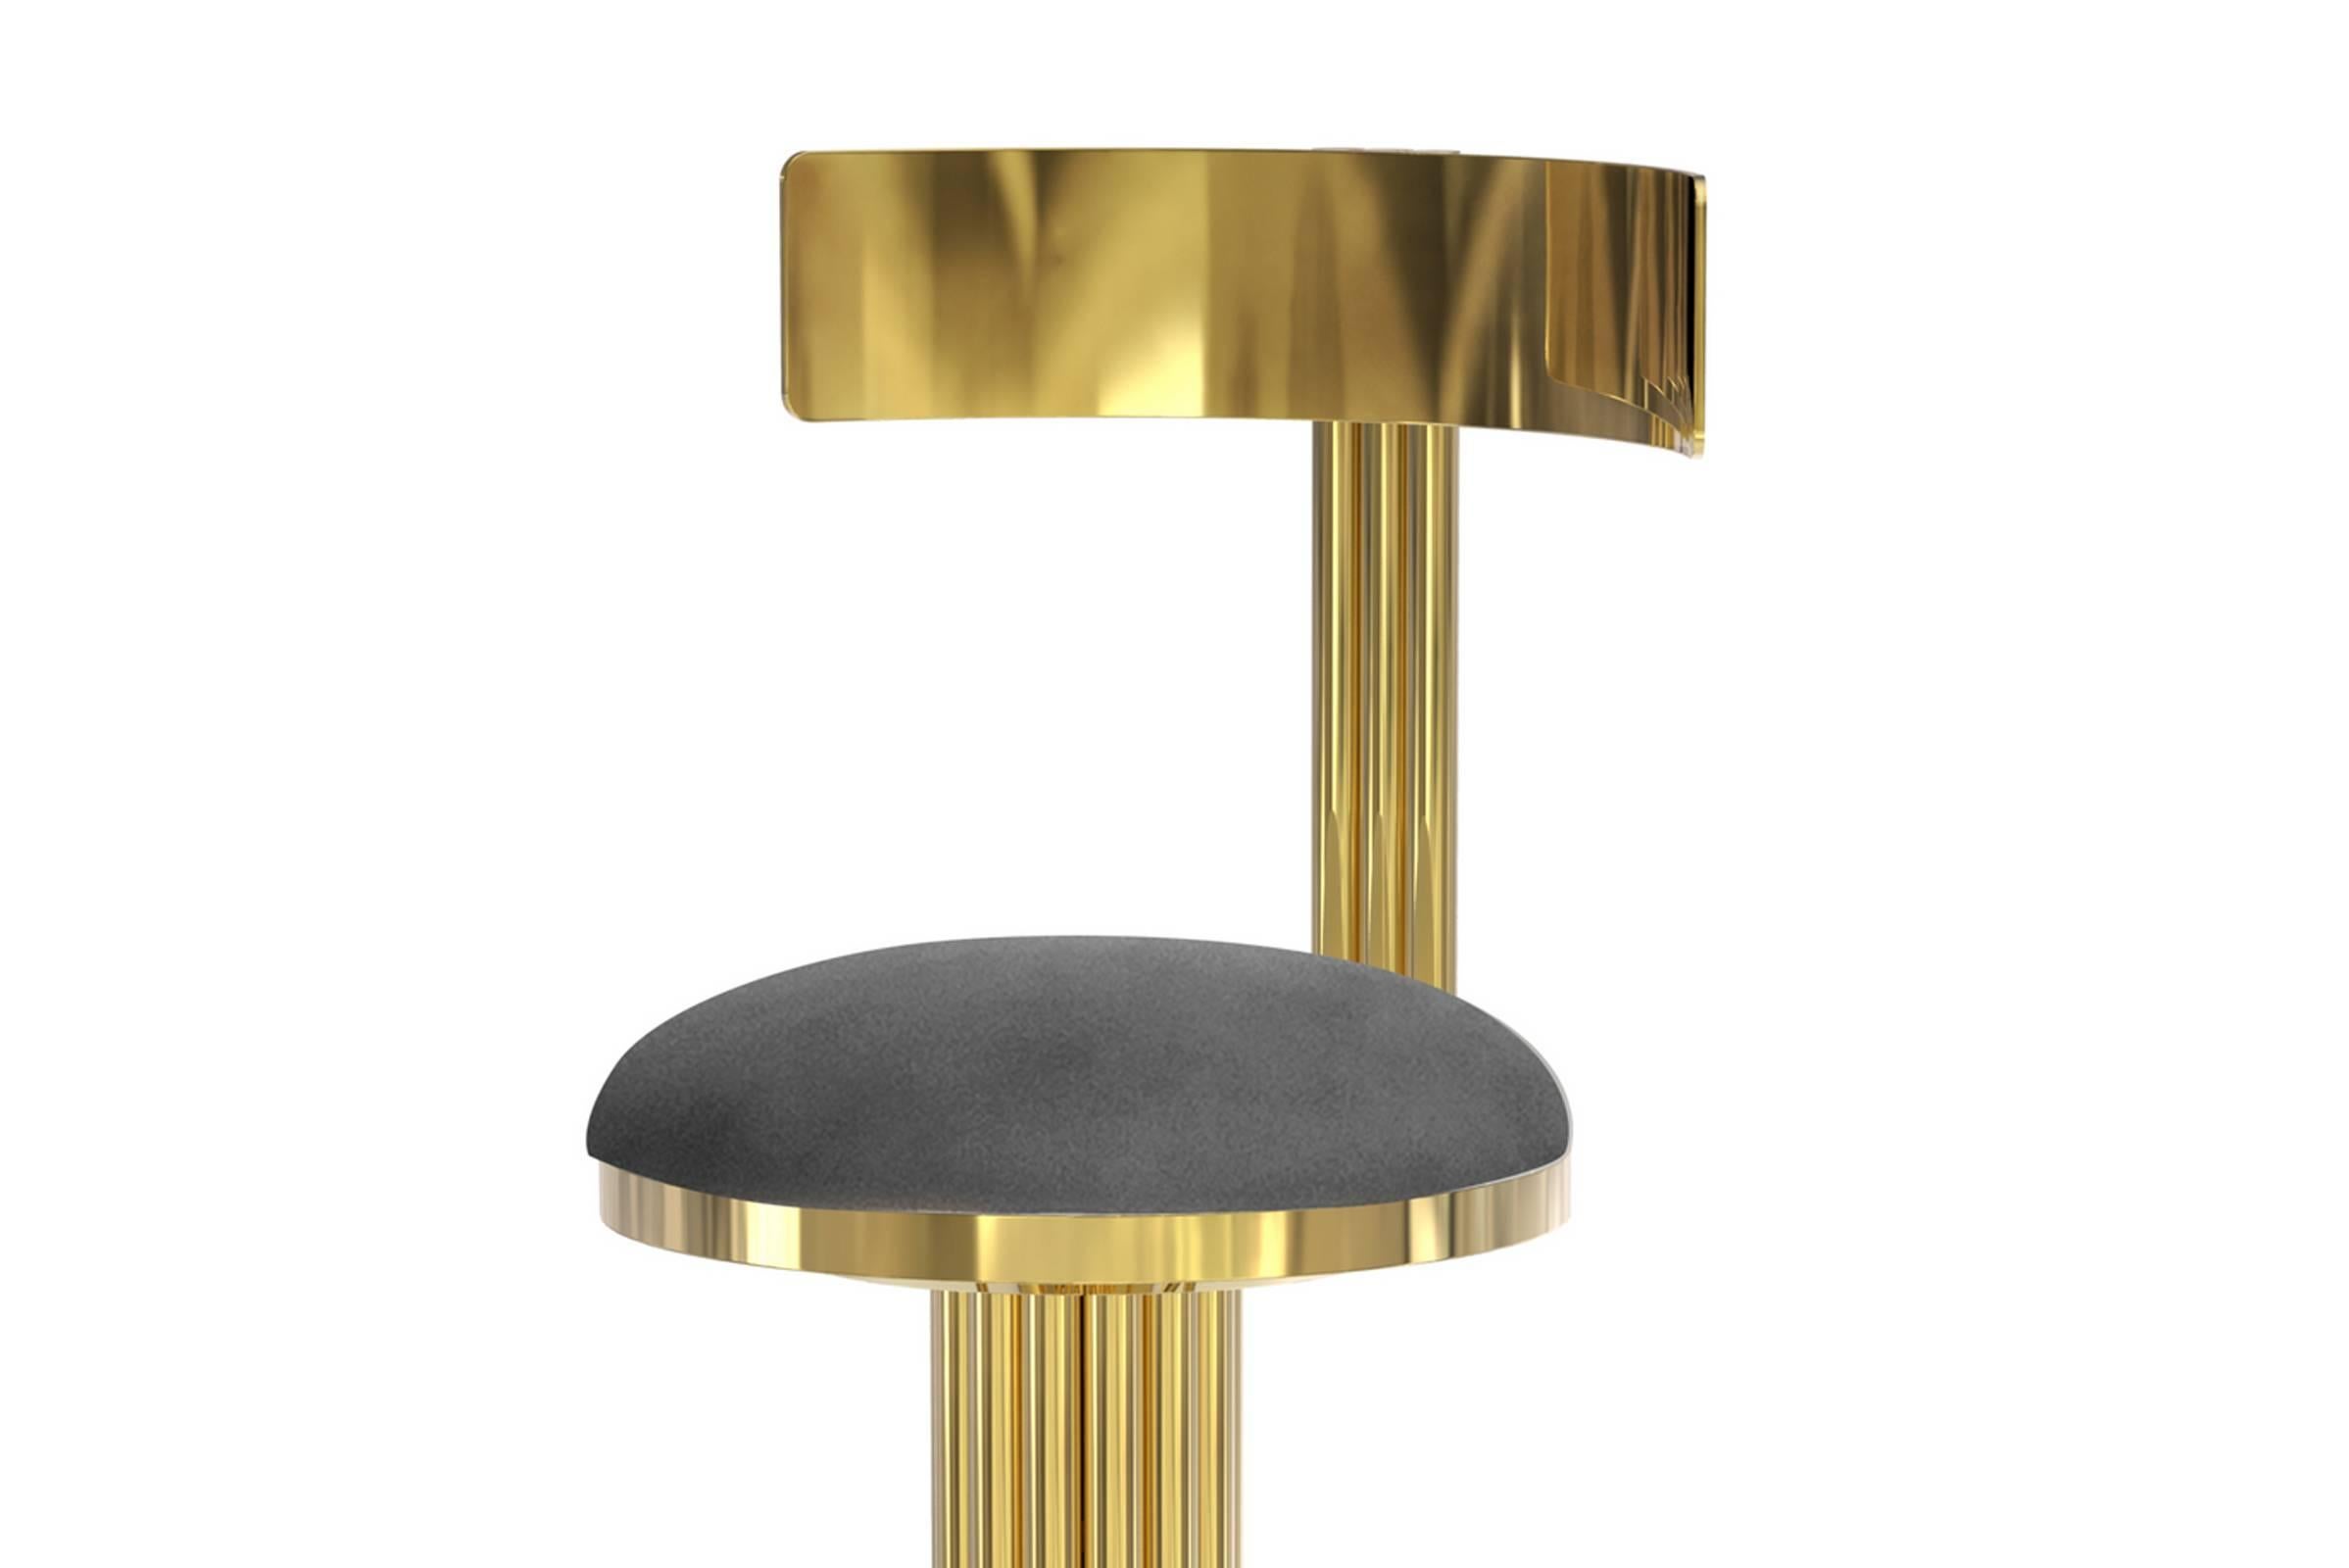 Bar stool Casablanca with structure 
in golded polished brass. With upholstered
seat covered with genuine leather.
